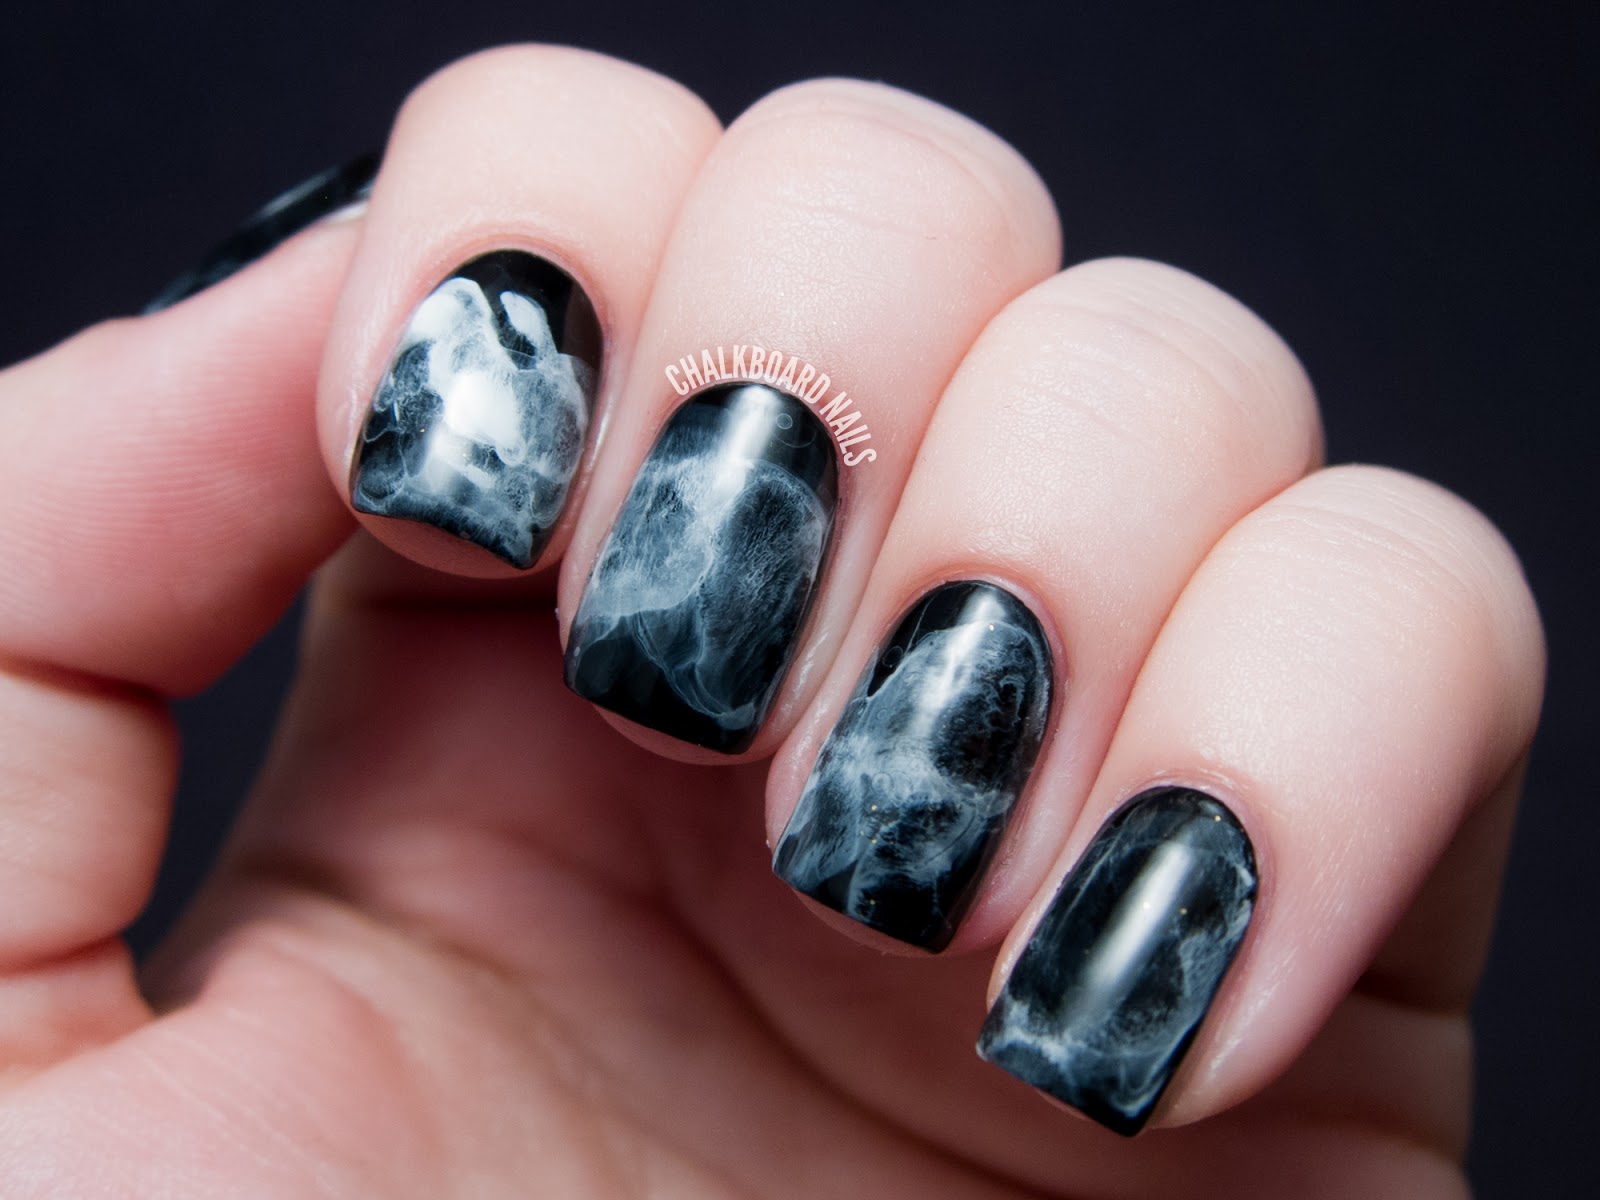 White and Black Nail Art on Pinterest - wide 6